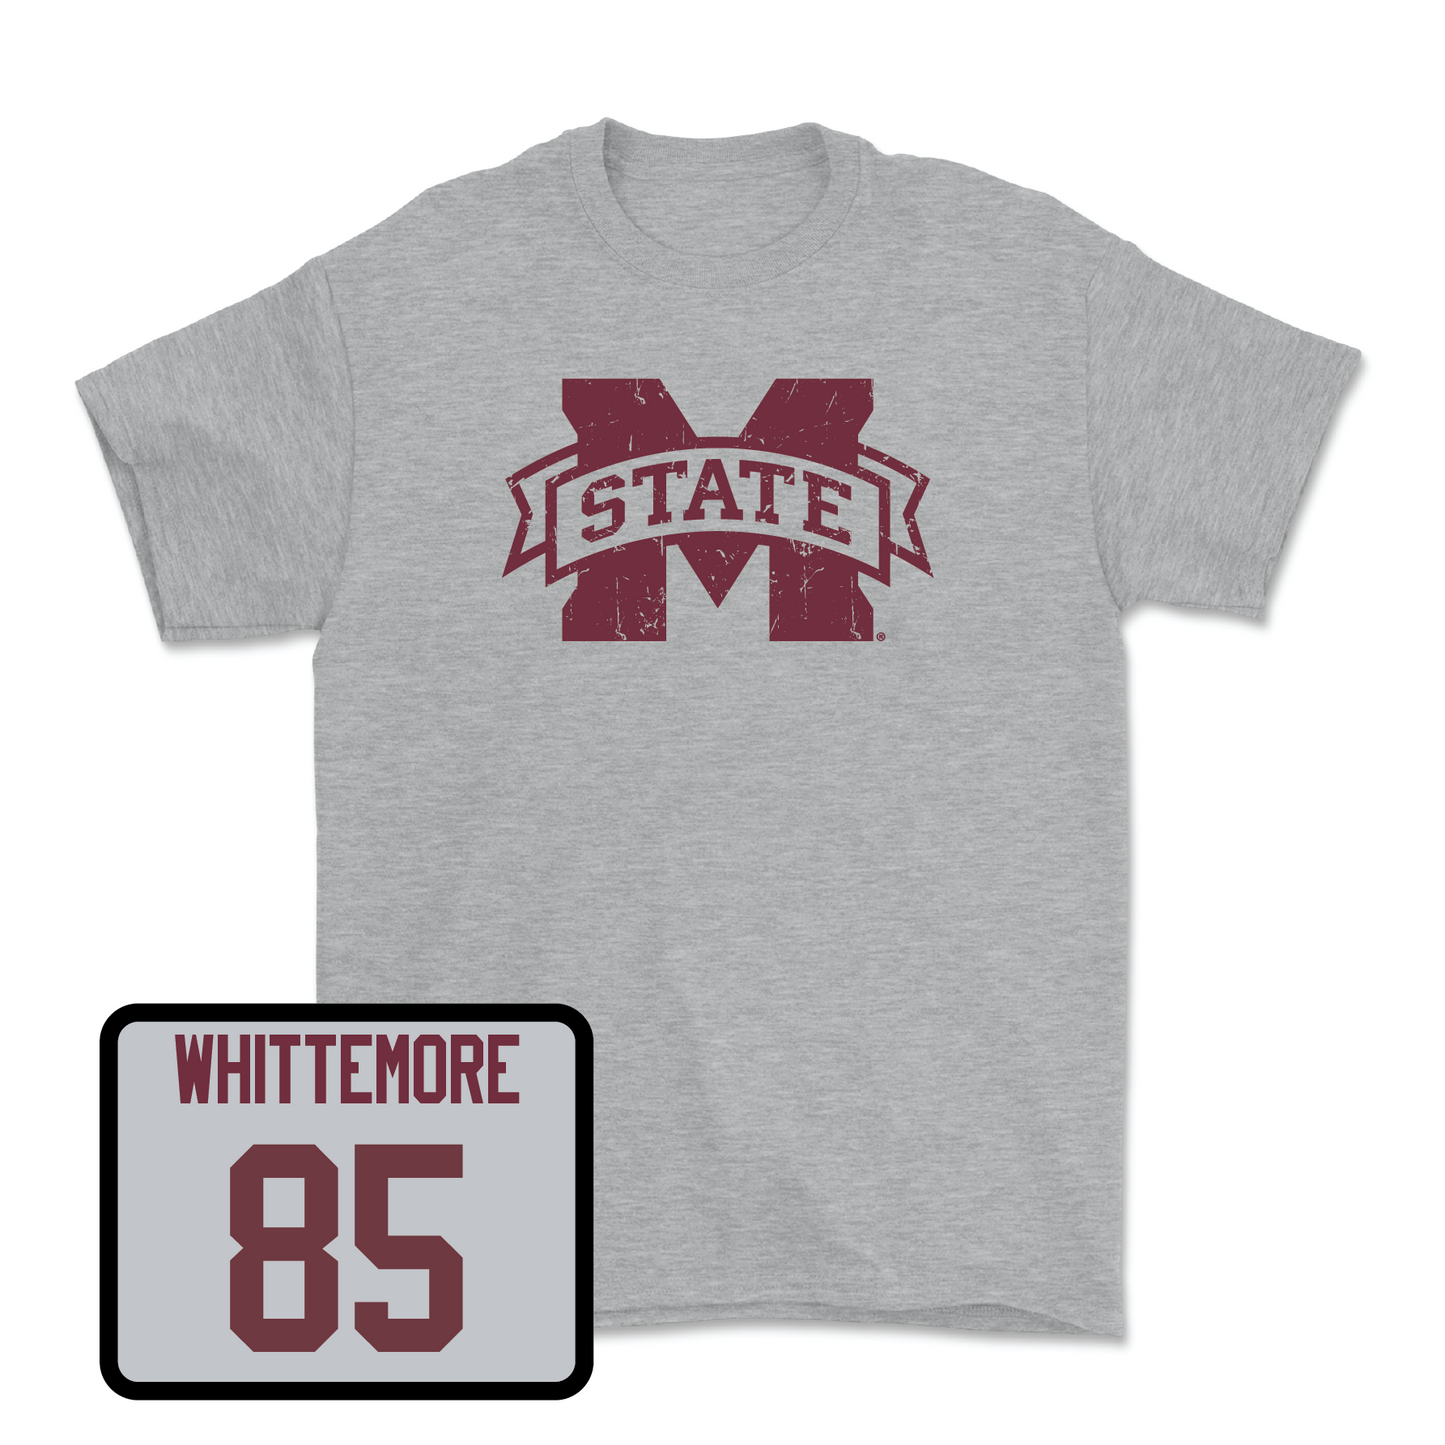 Sport Grey Football Classic Tee Youth Medium / Creed Whittemore | #85